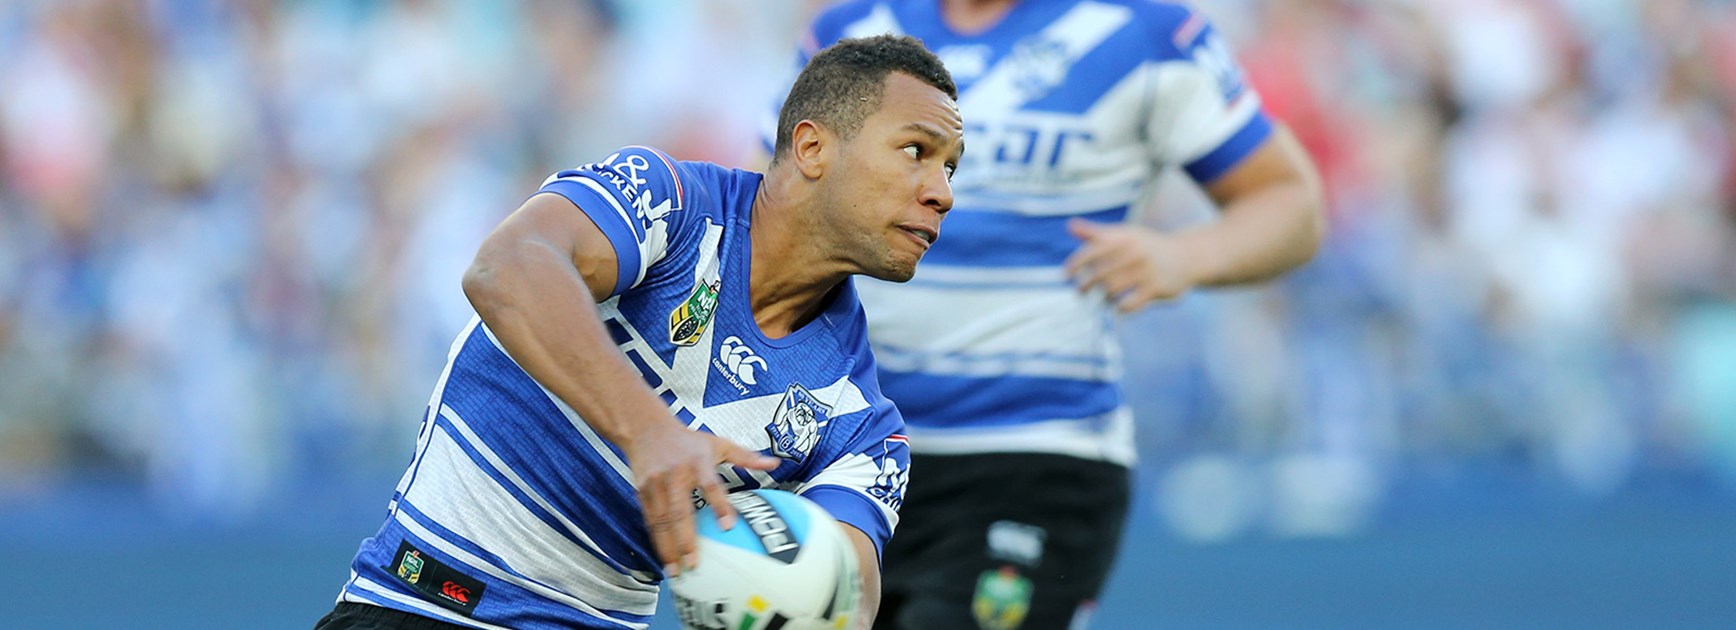 Moses Mbye starred in the Bulldogs' victory over the Dragons in Round 13 of the Telstra Premiership.